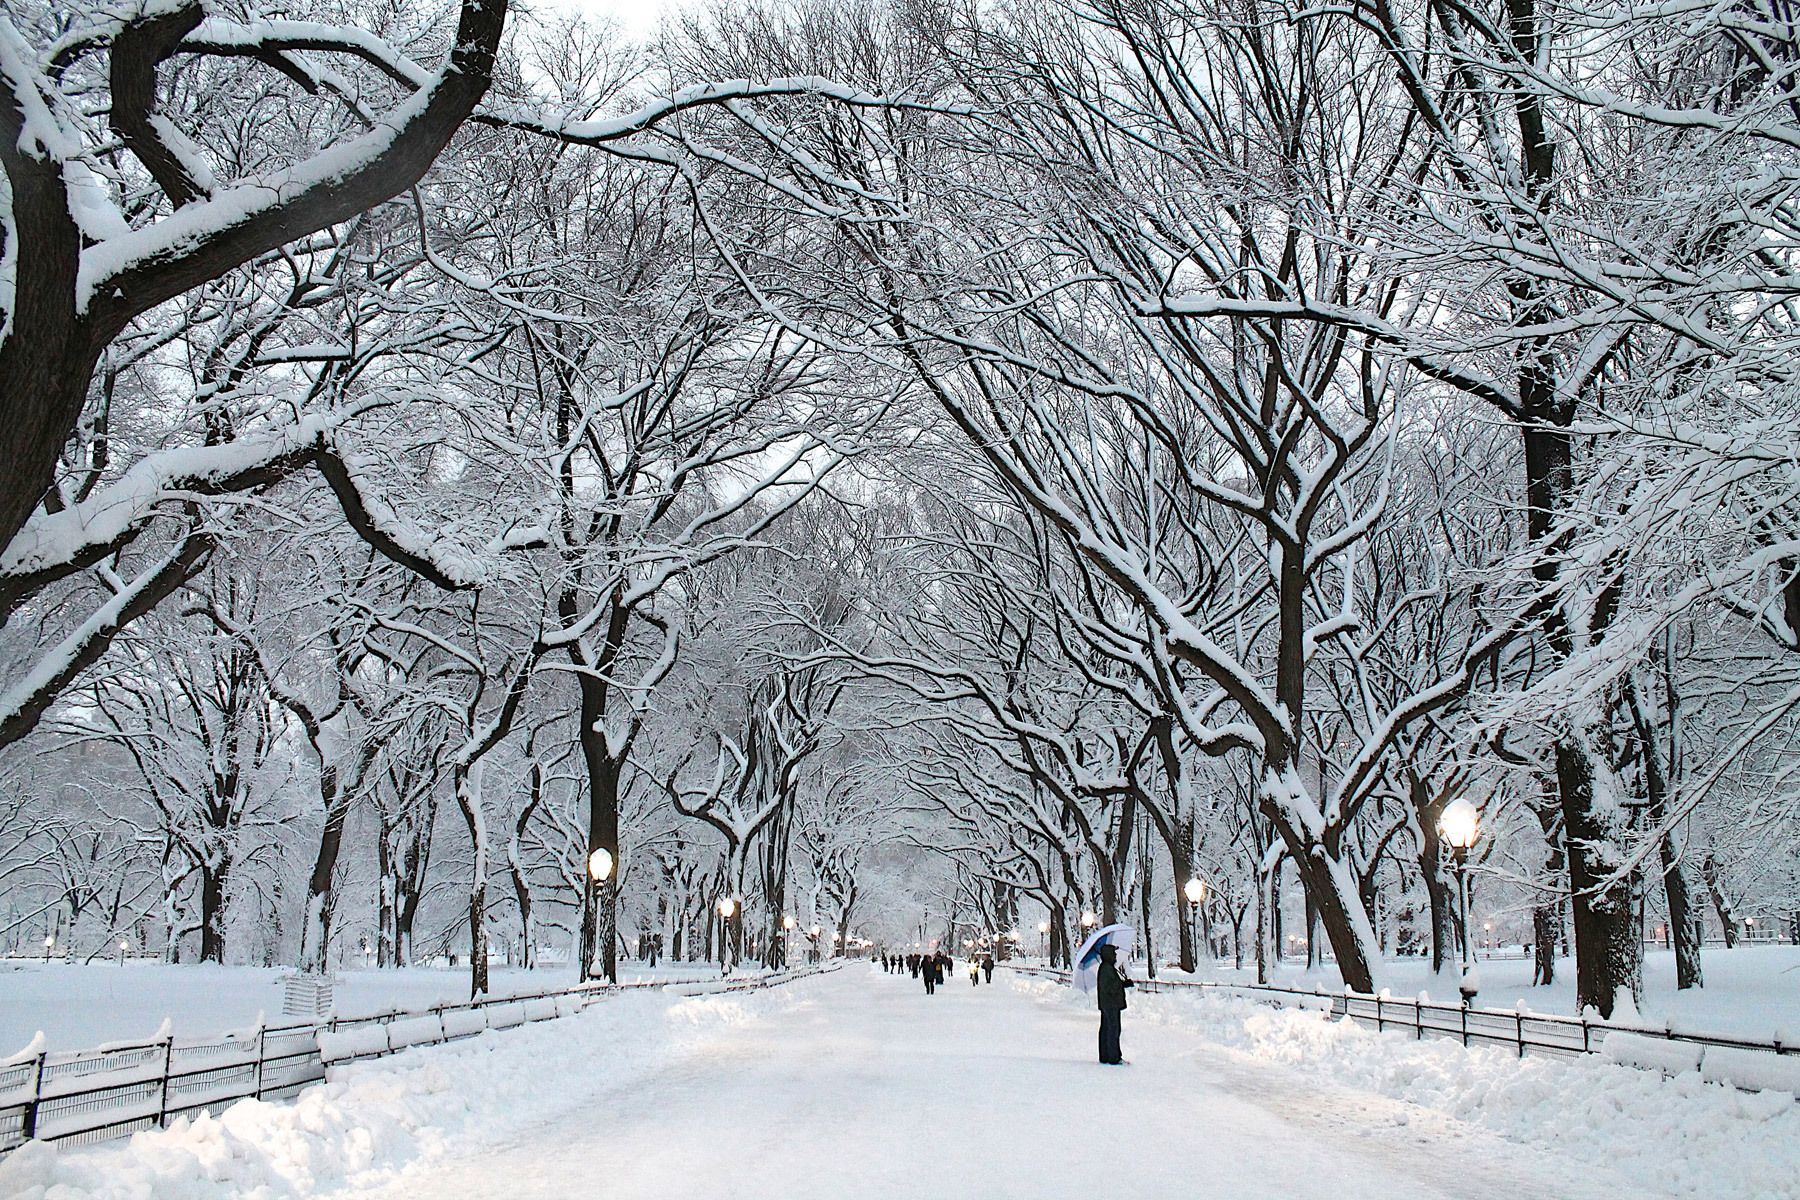 PLACES FOR GREAT SNOW PHOTOS IN NYC